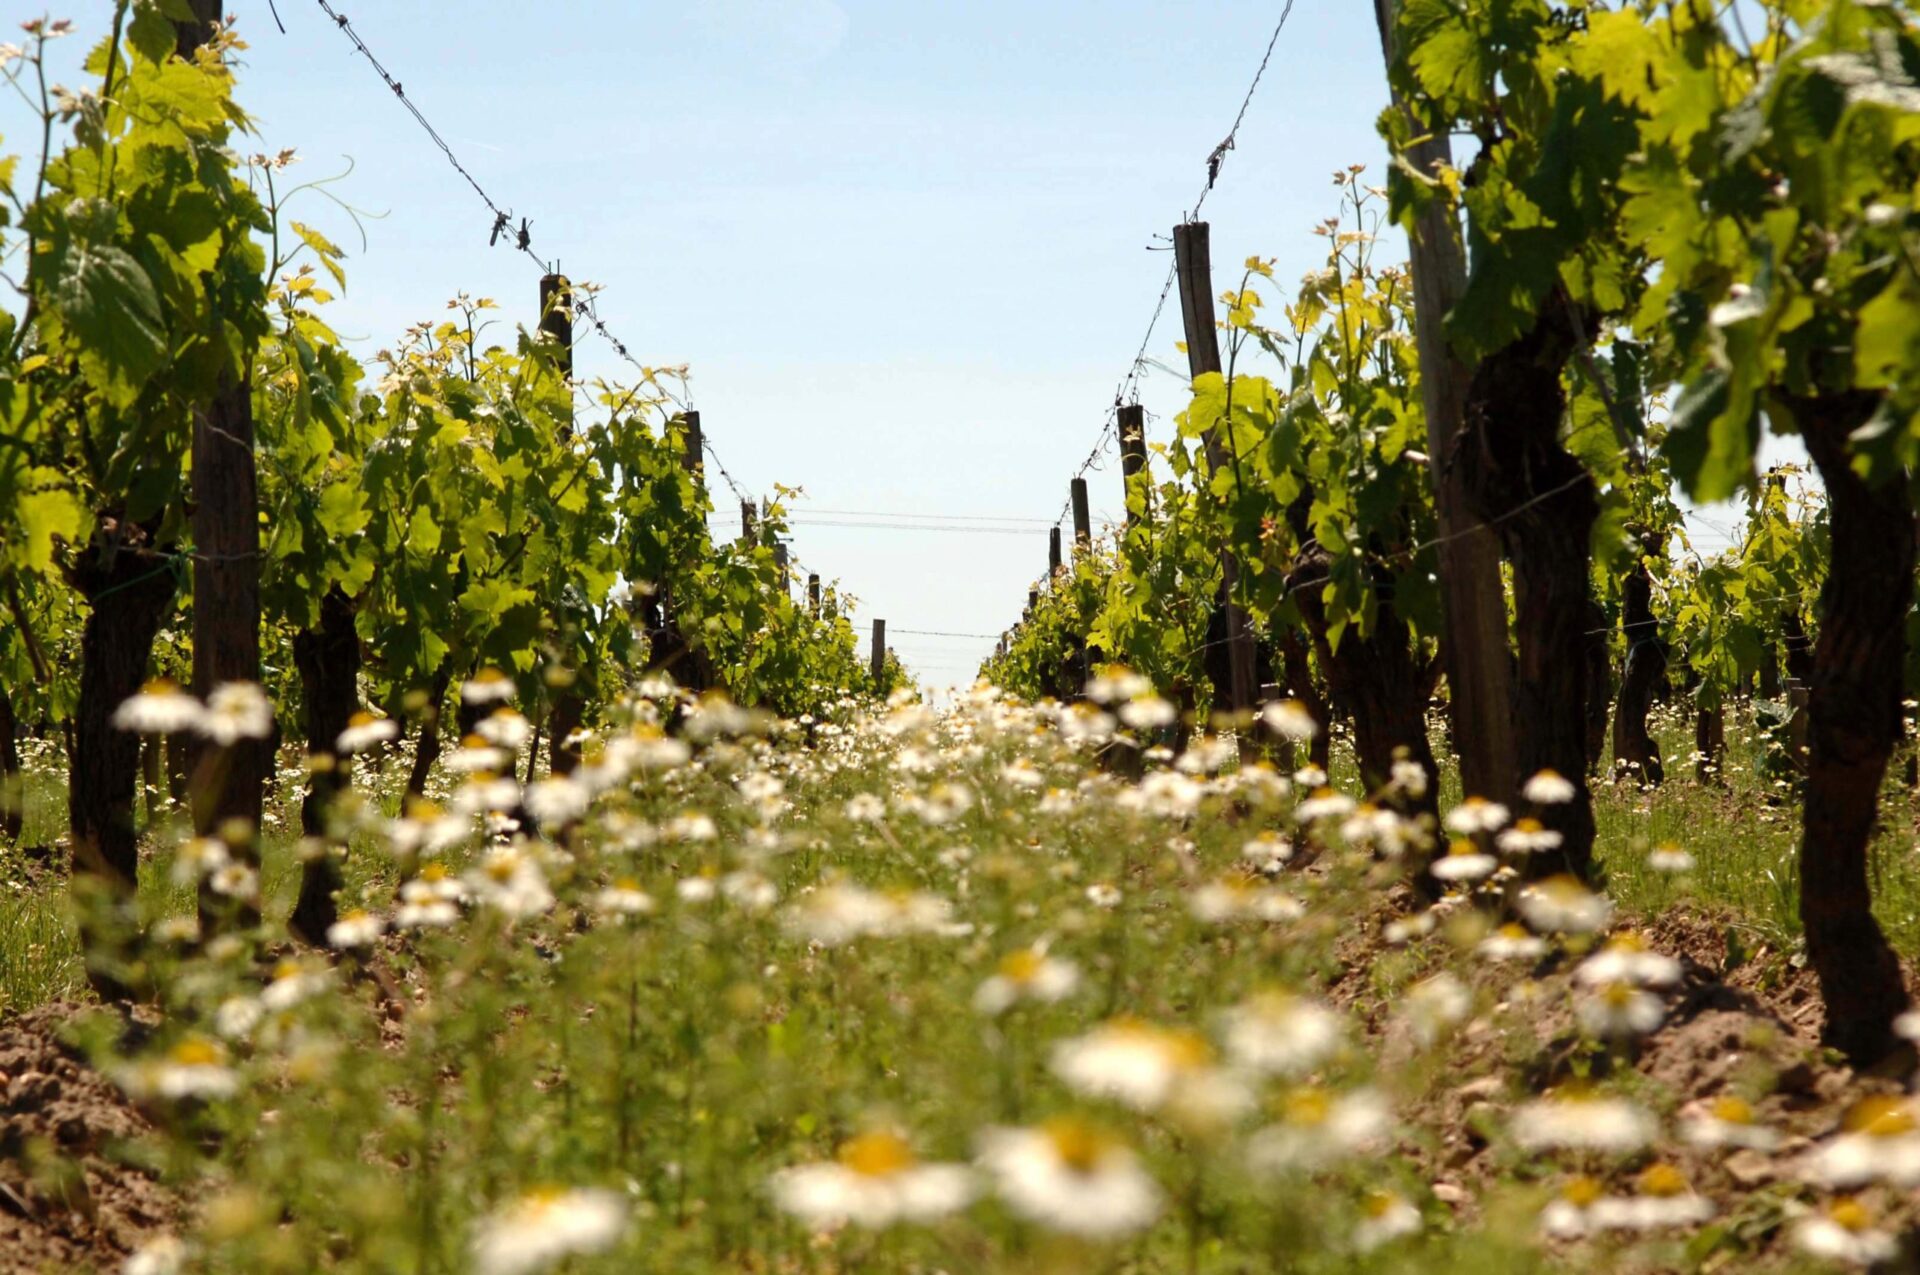 Cover crops attract beneficial insects, increasing biodiversity of a vineyard